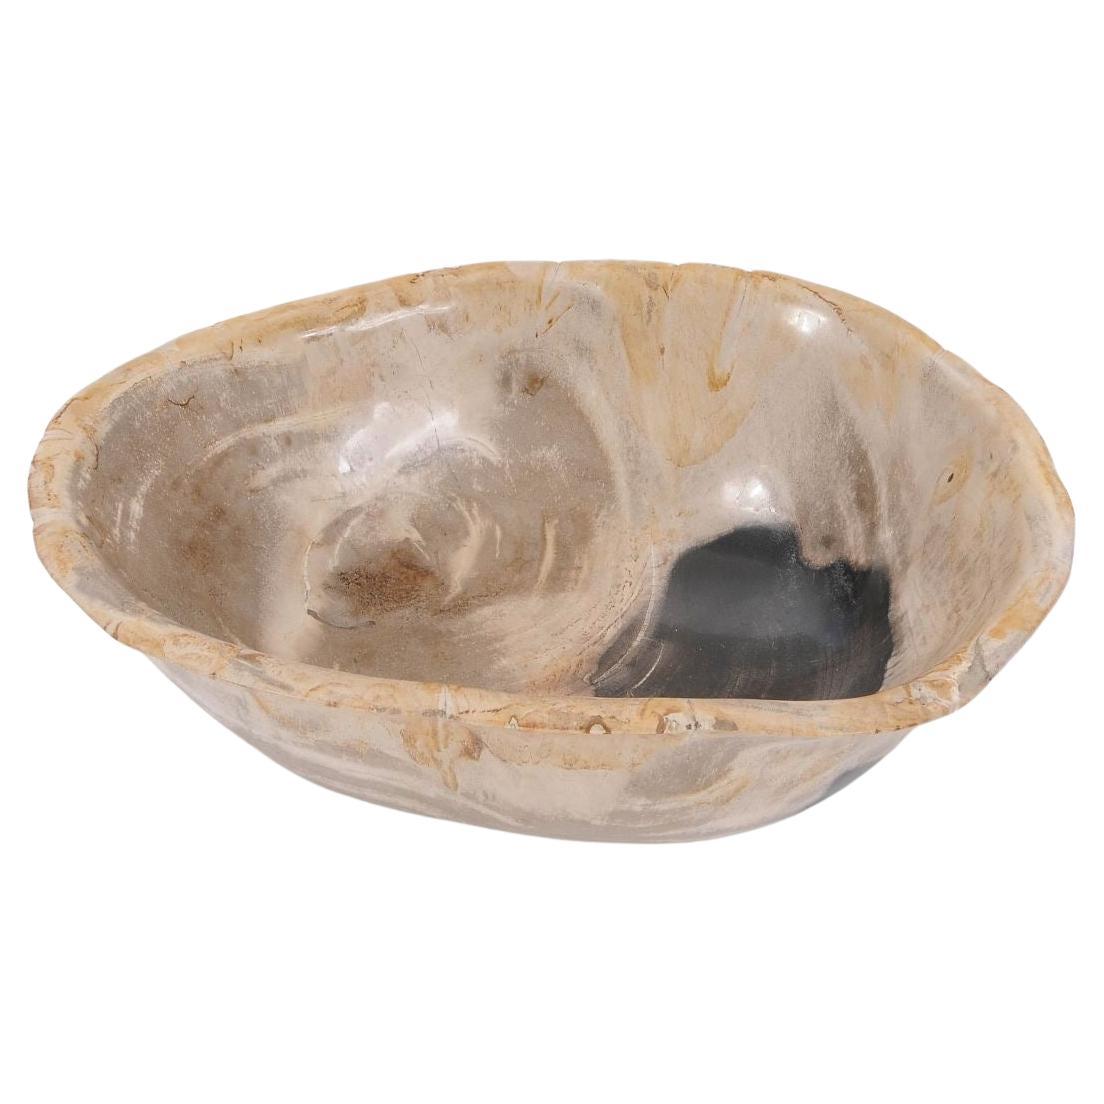 Beige With Black Accents Large Petrified Wood Bowl, Indonesia, Contemporary For Sale